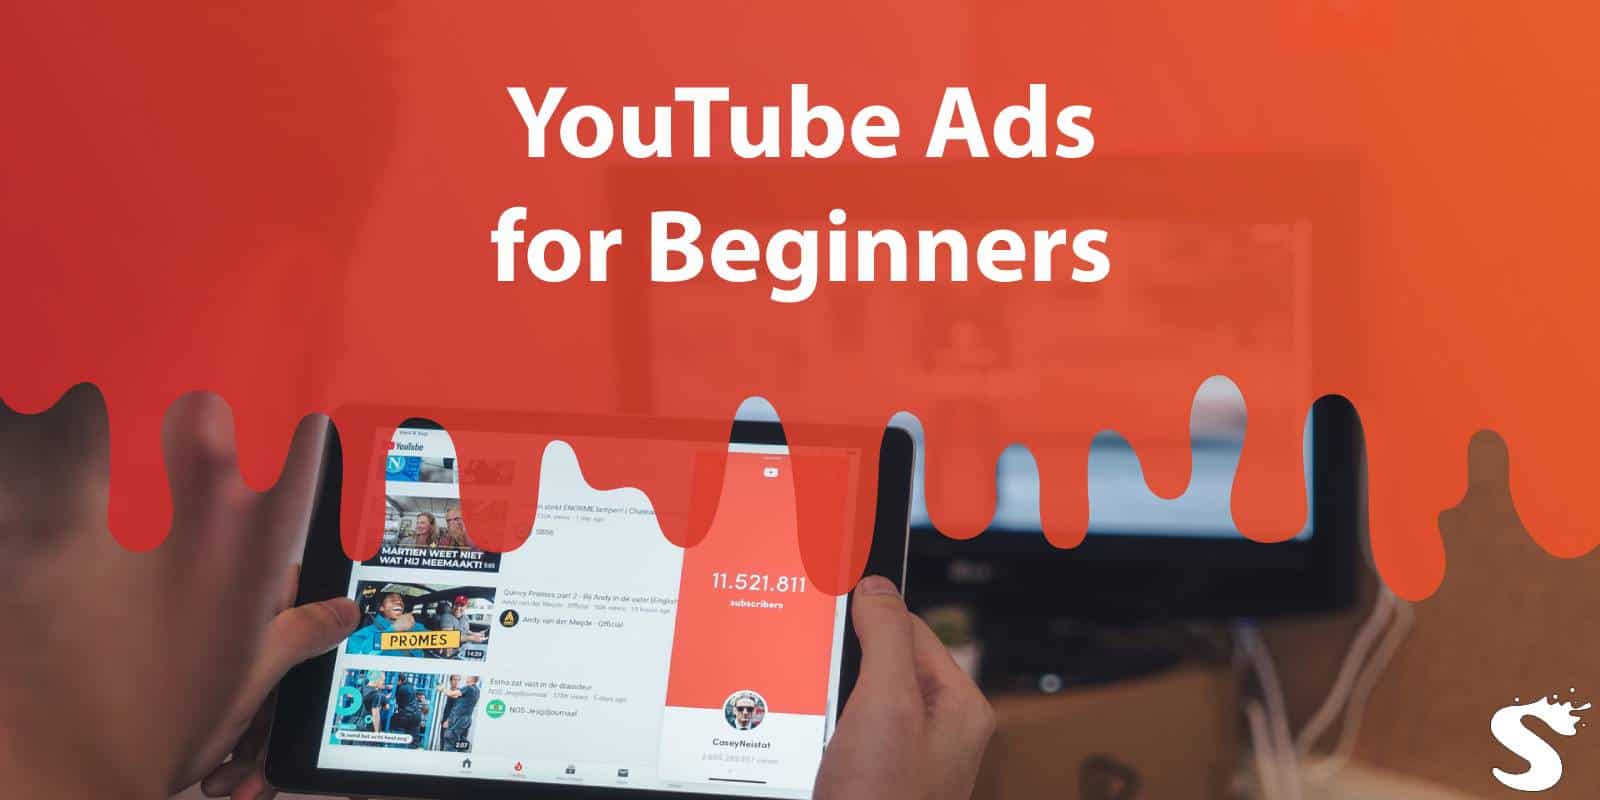 YouTube Ads for Beginners